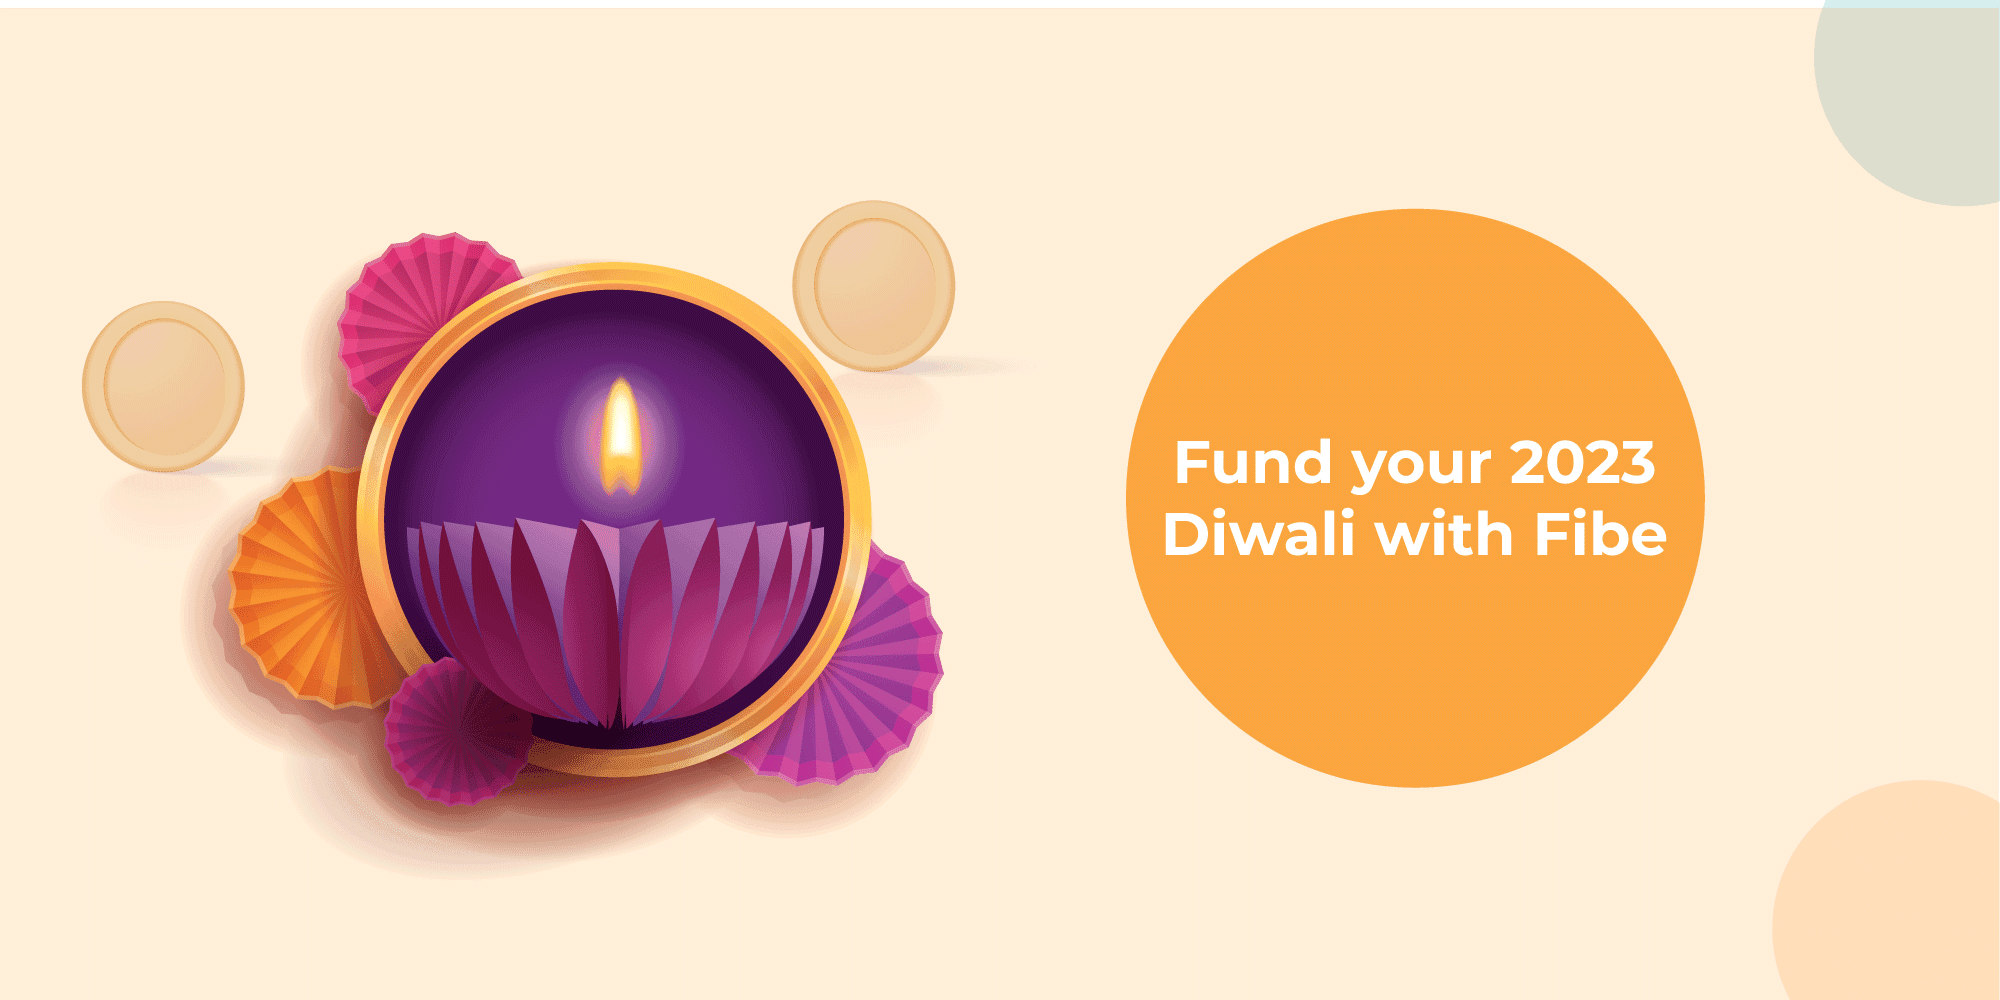 Diwali Holidays: 5 Ways to celebrate with Fibe Personal Loan